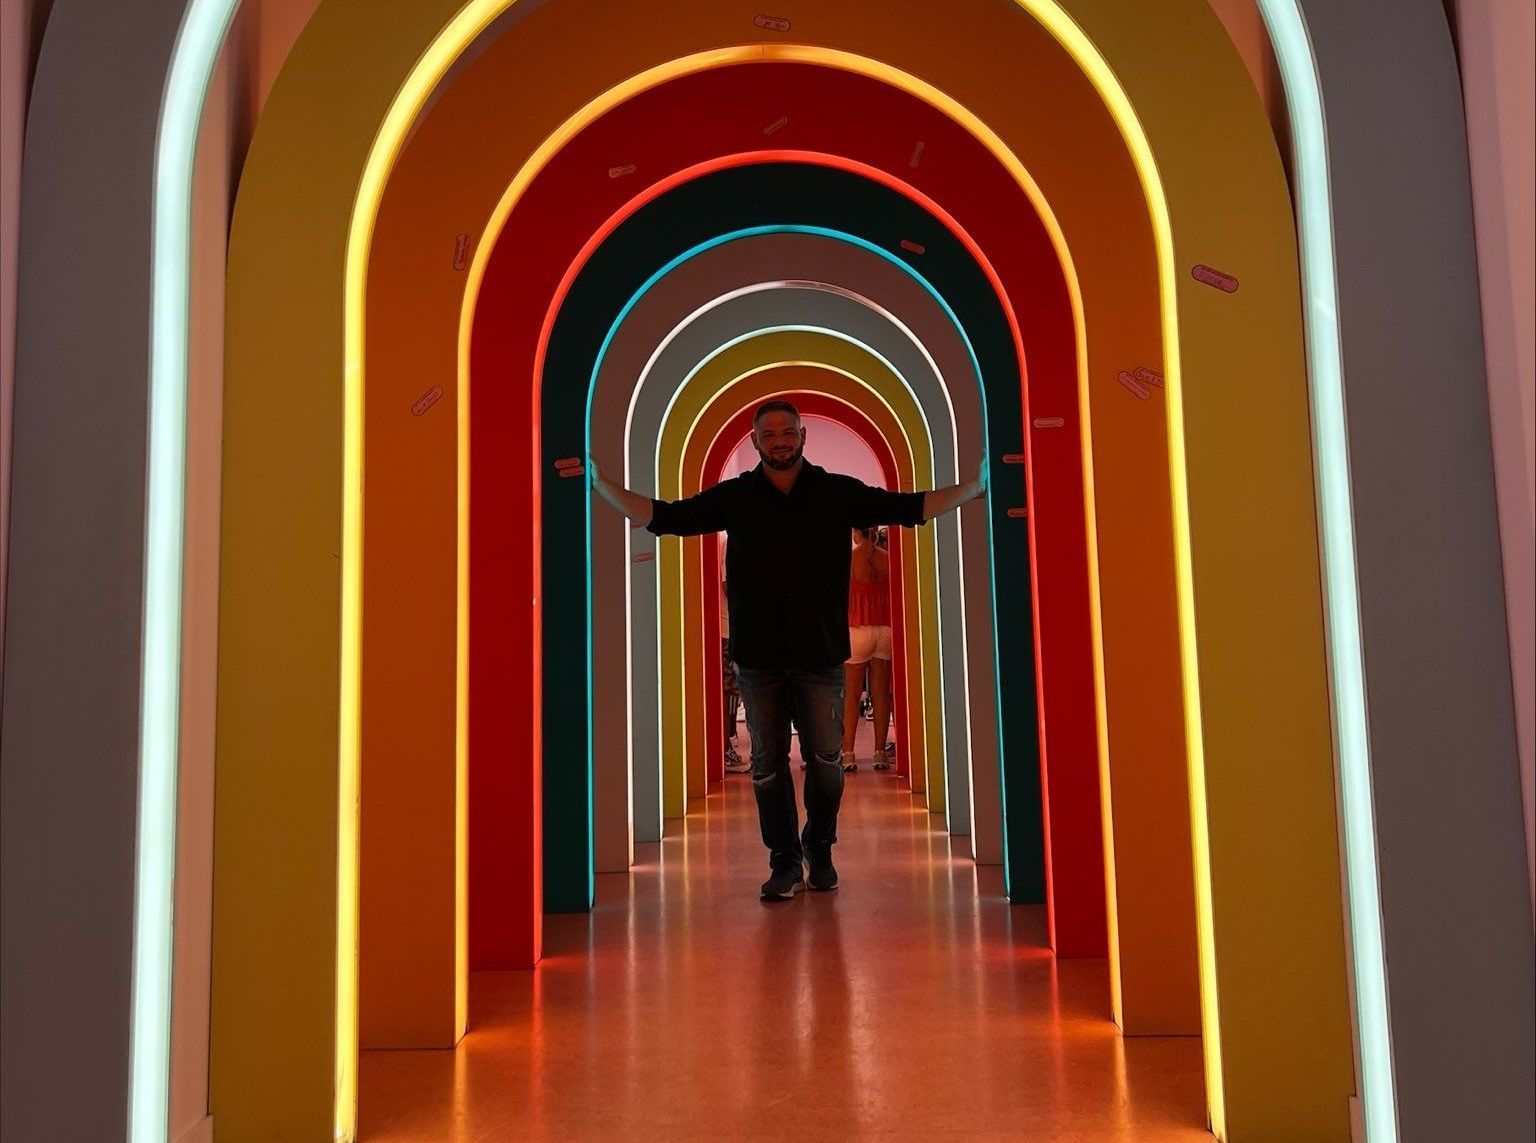 A man is standing in a rainbow colored tunnel with his arms outstretched